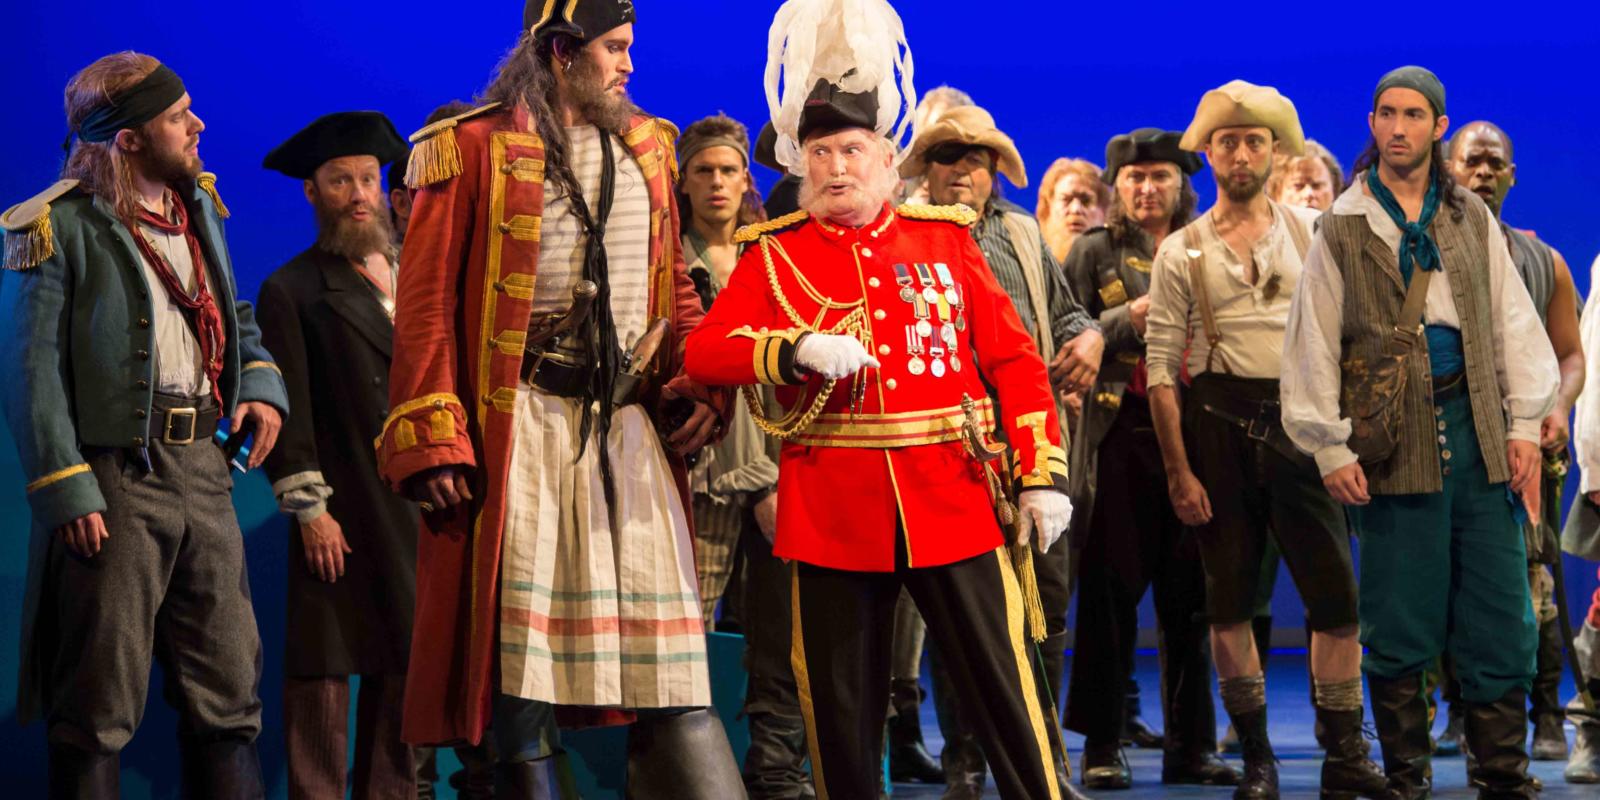 ENO's The Pirates of Penzance - Ashley Riches as The Pirate King and Andrew Shore as the Major-General. Photo by Tom Bowles